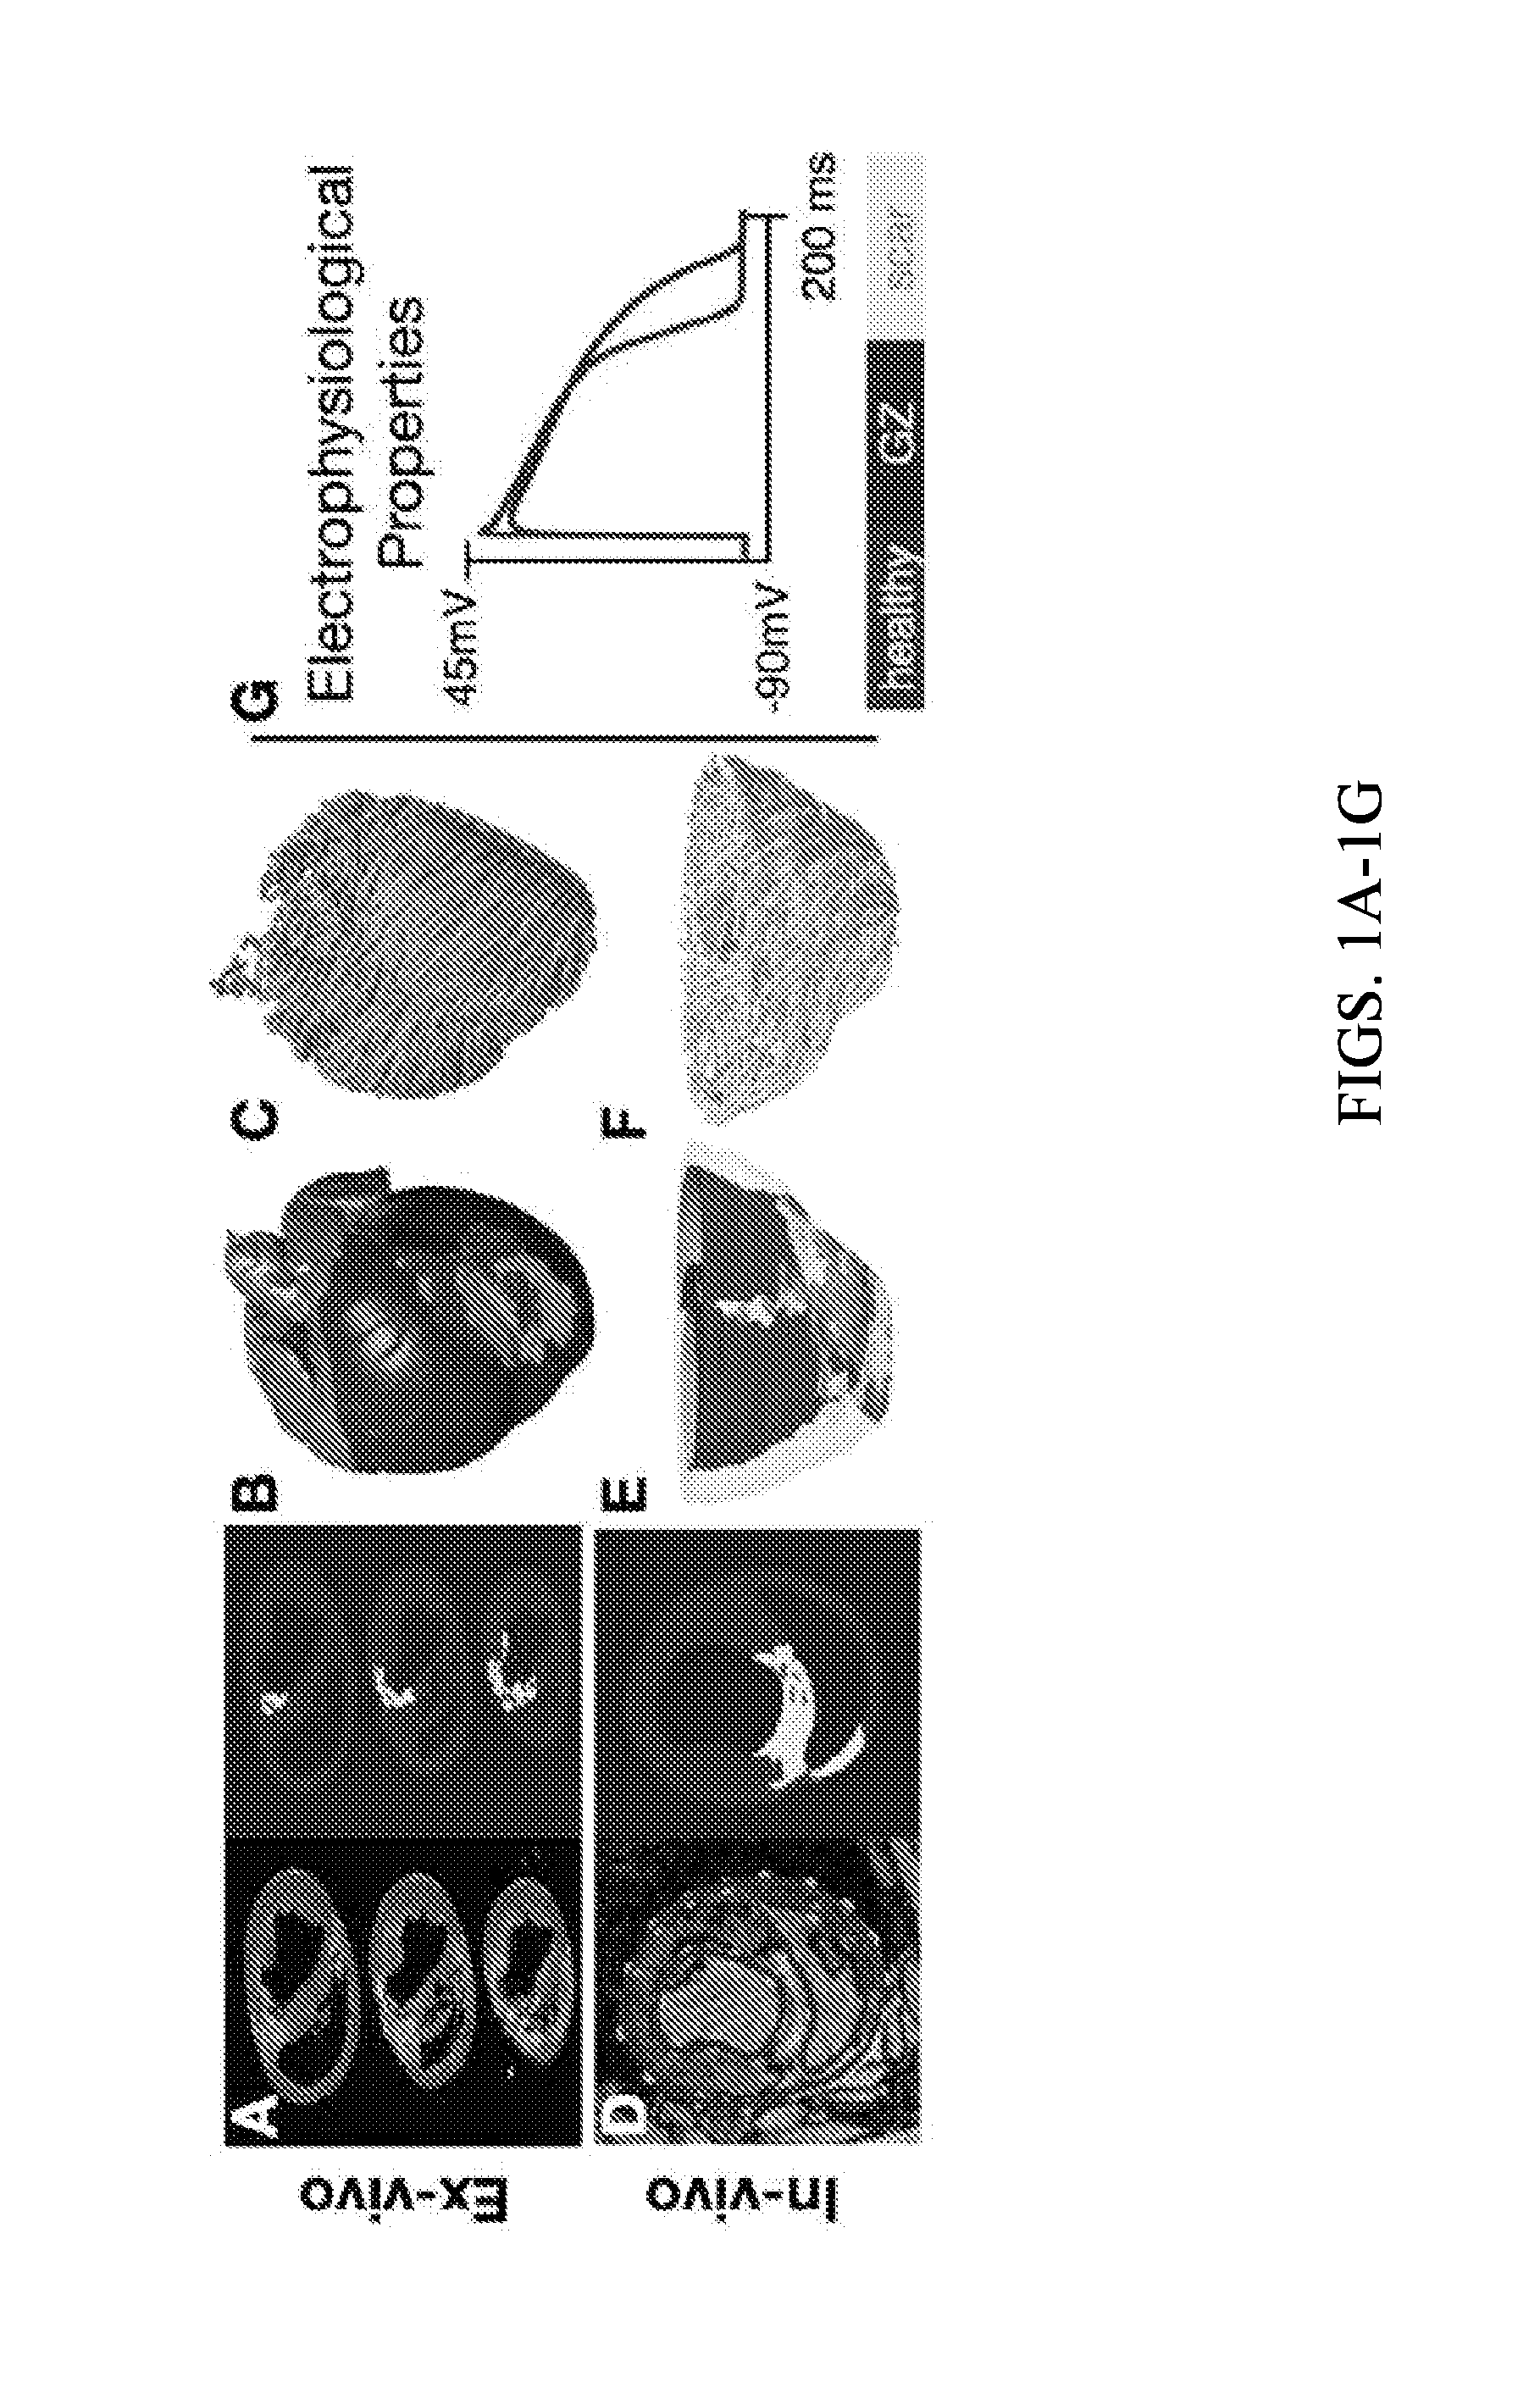 System and method for planning a patient-specific cardiac procedure